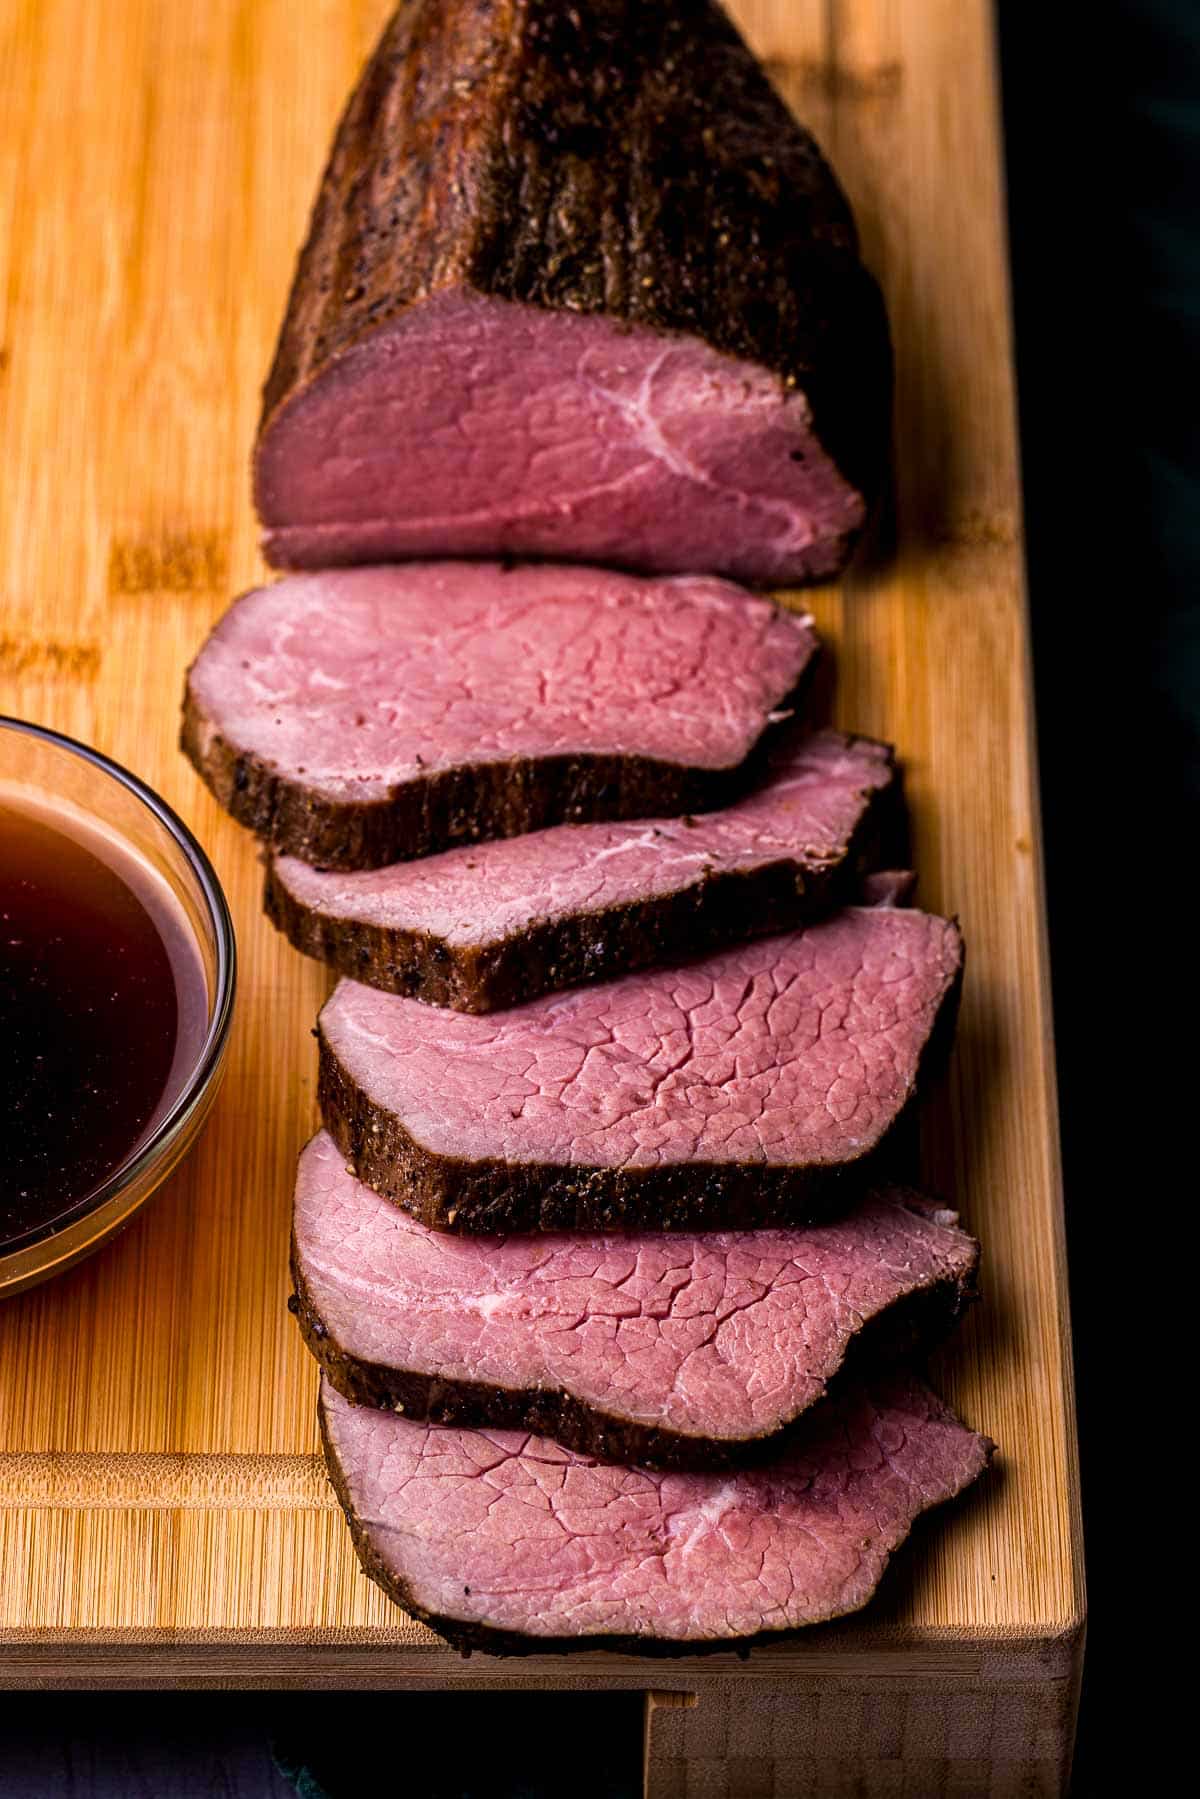 slices of beef on a wood board with jus ont he side